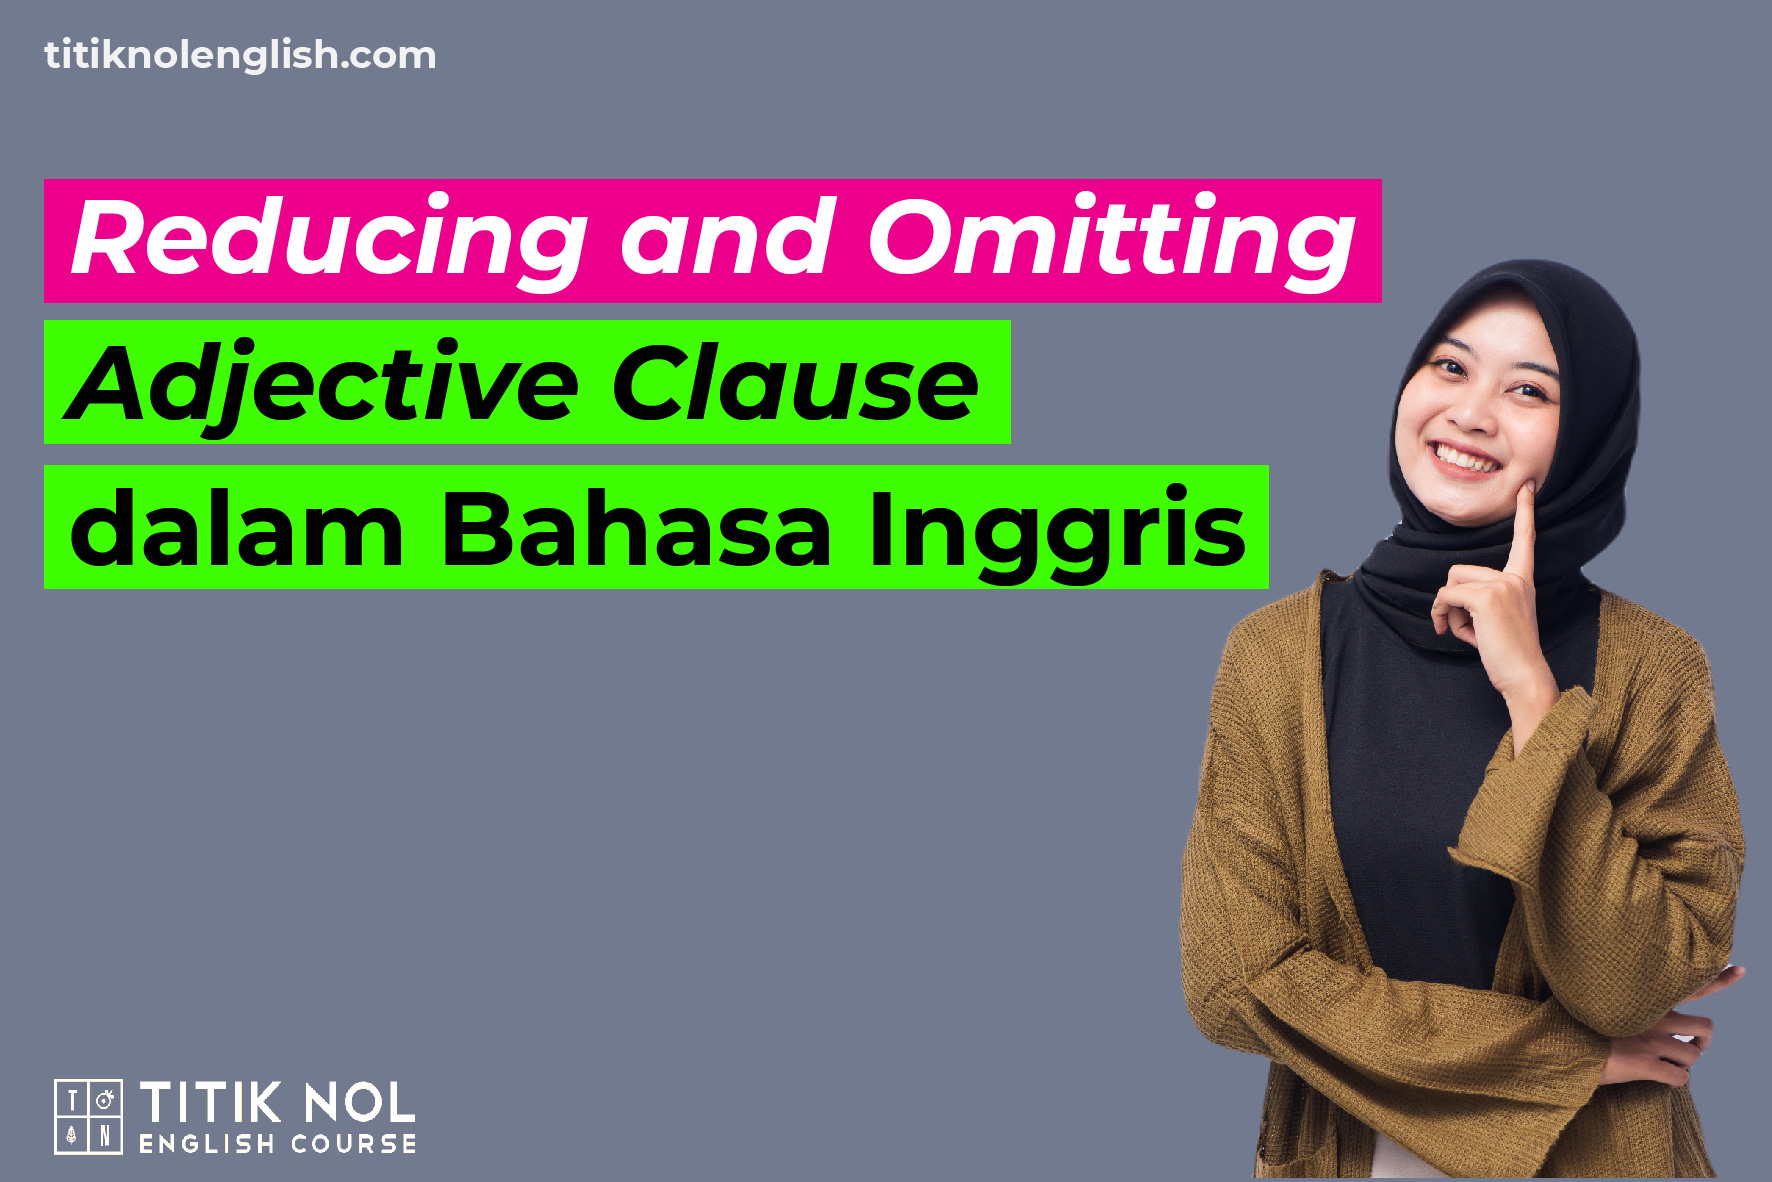 Reducing and Omitting Adjective Clause